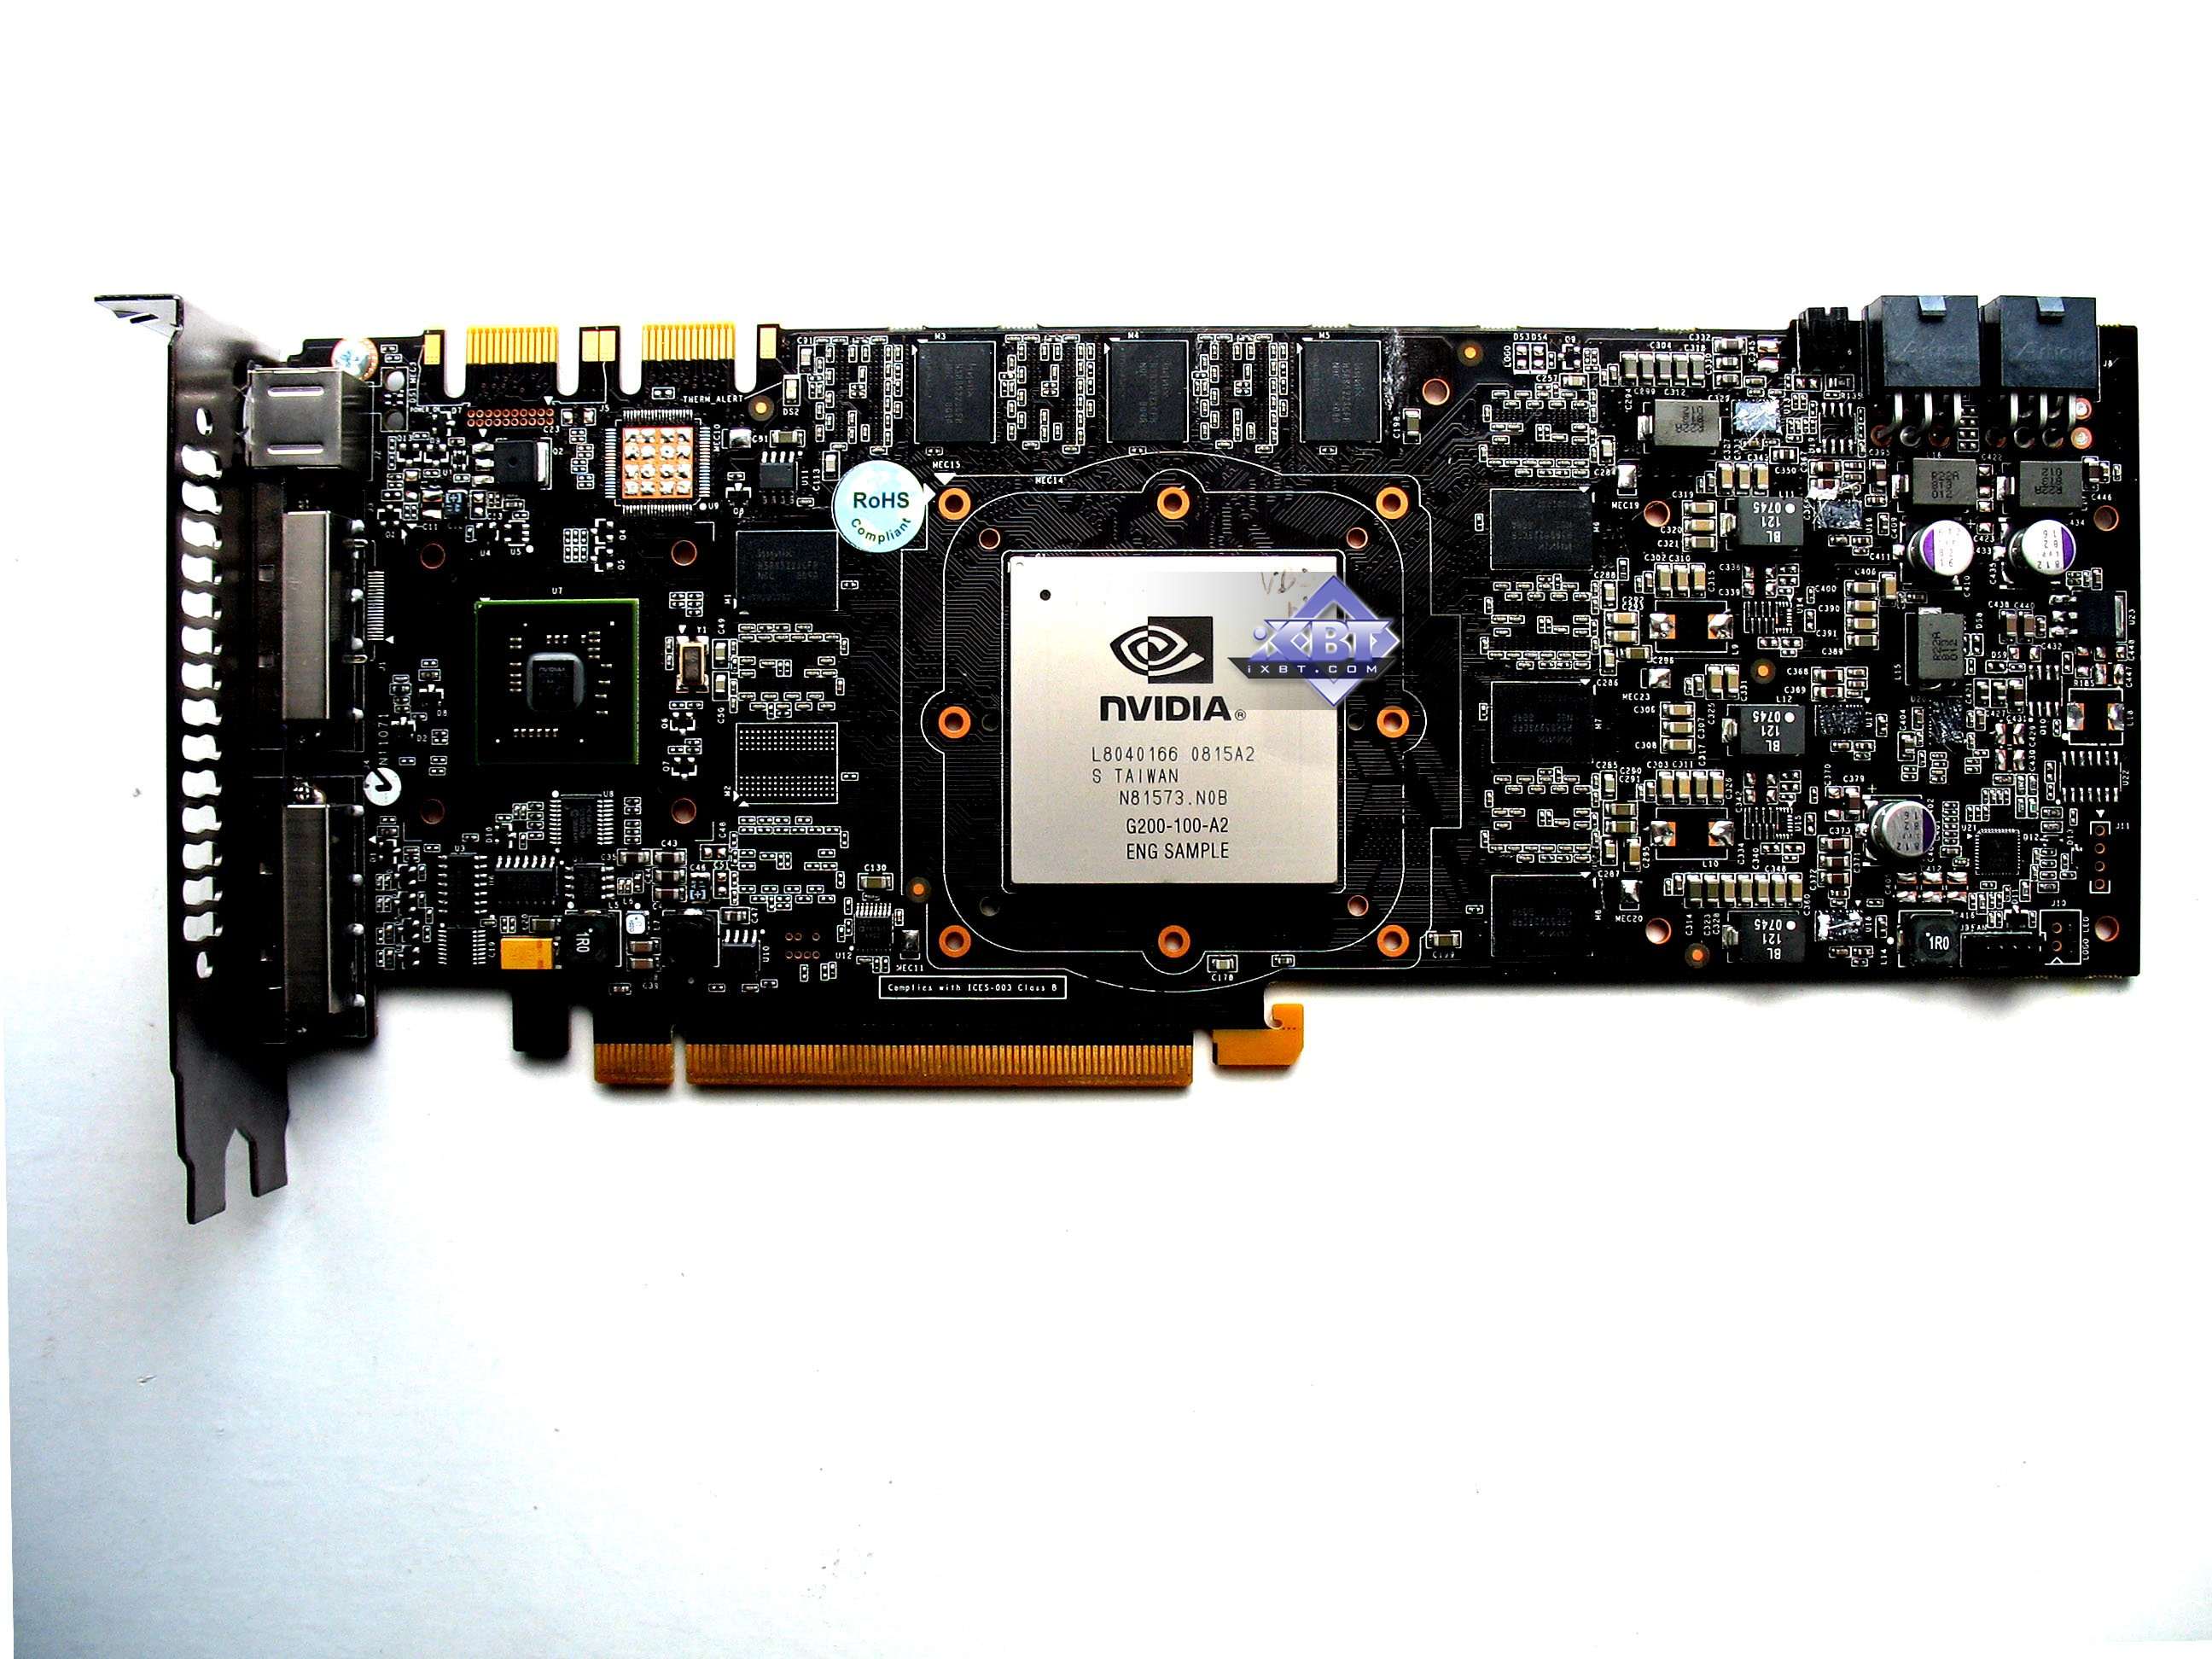 iXBT Labs - NVIDIA GeForce GTX 260 896MB - Page 1: Introduction